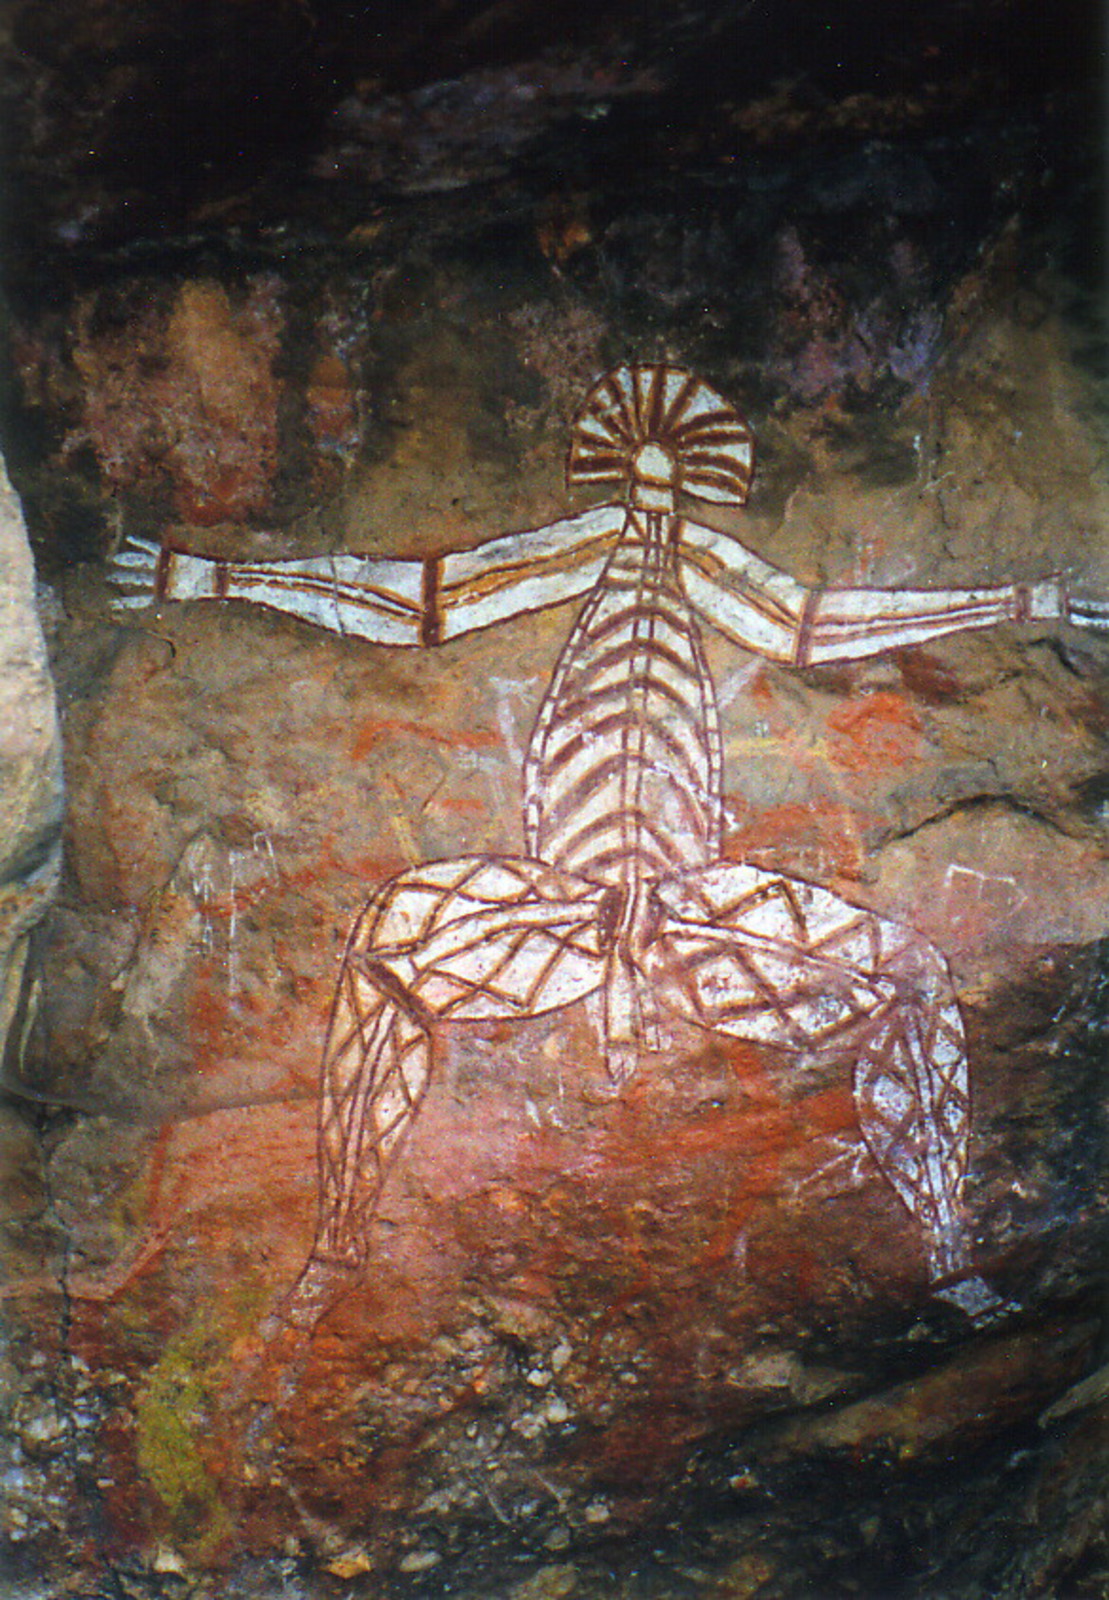 Rock art in the famous x-ray style at Nourlangie